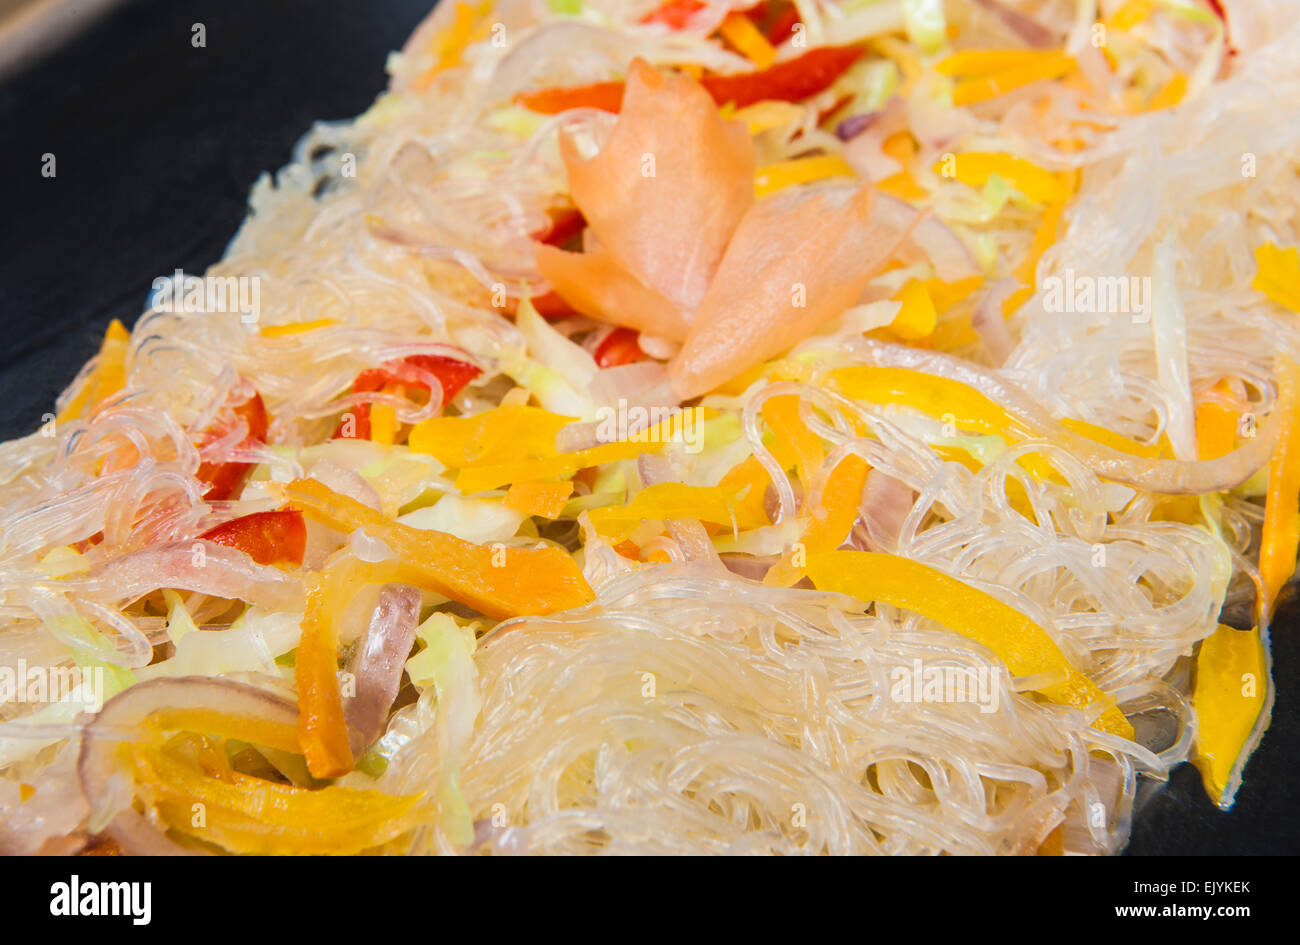 Closeup of chinese glass noodles on display at a hotel restaurant buffet Stock Photo